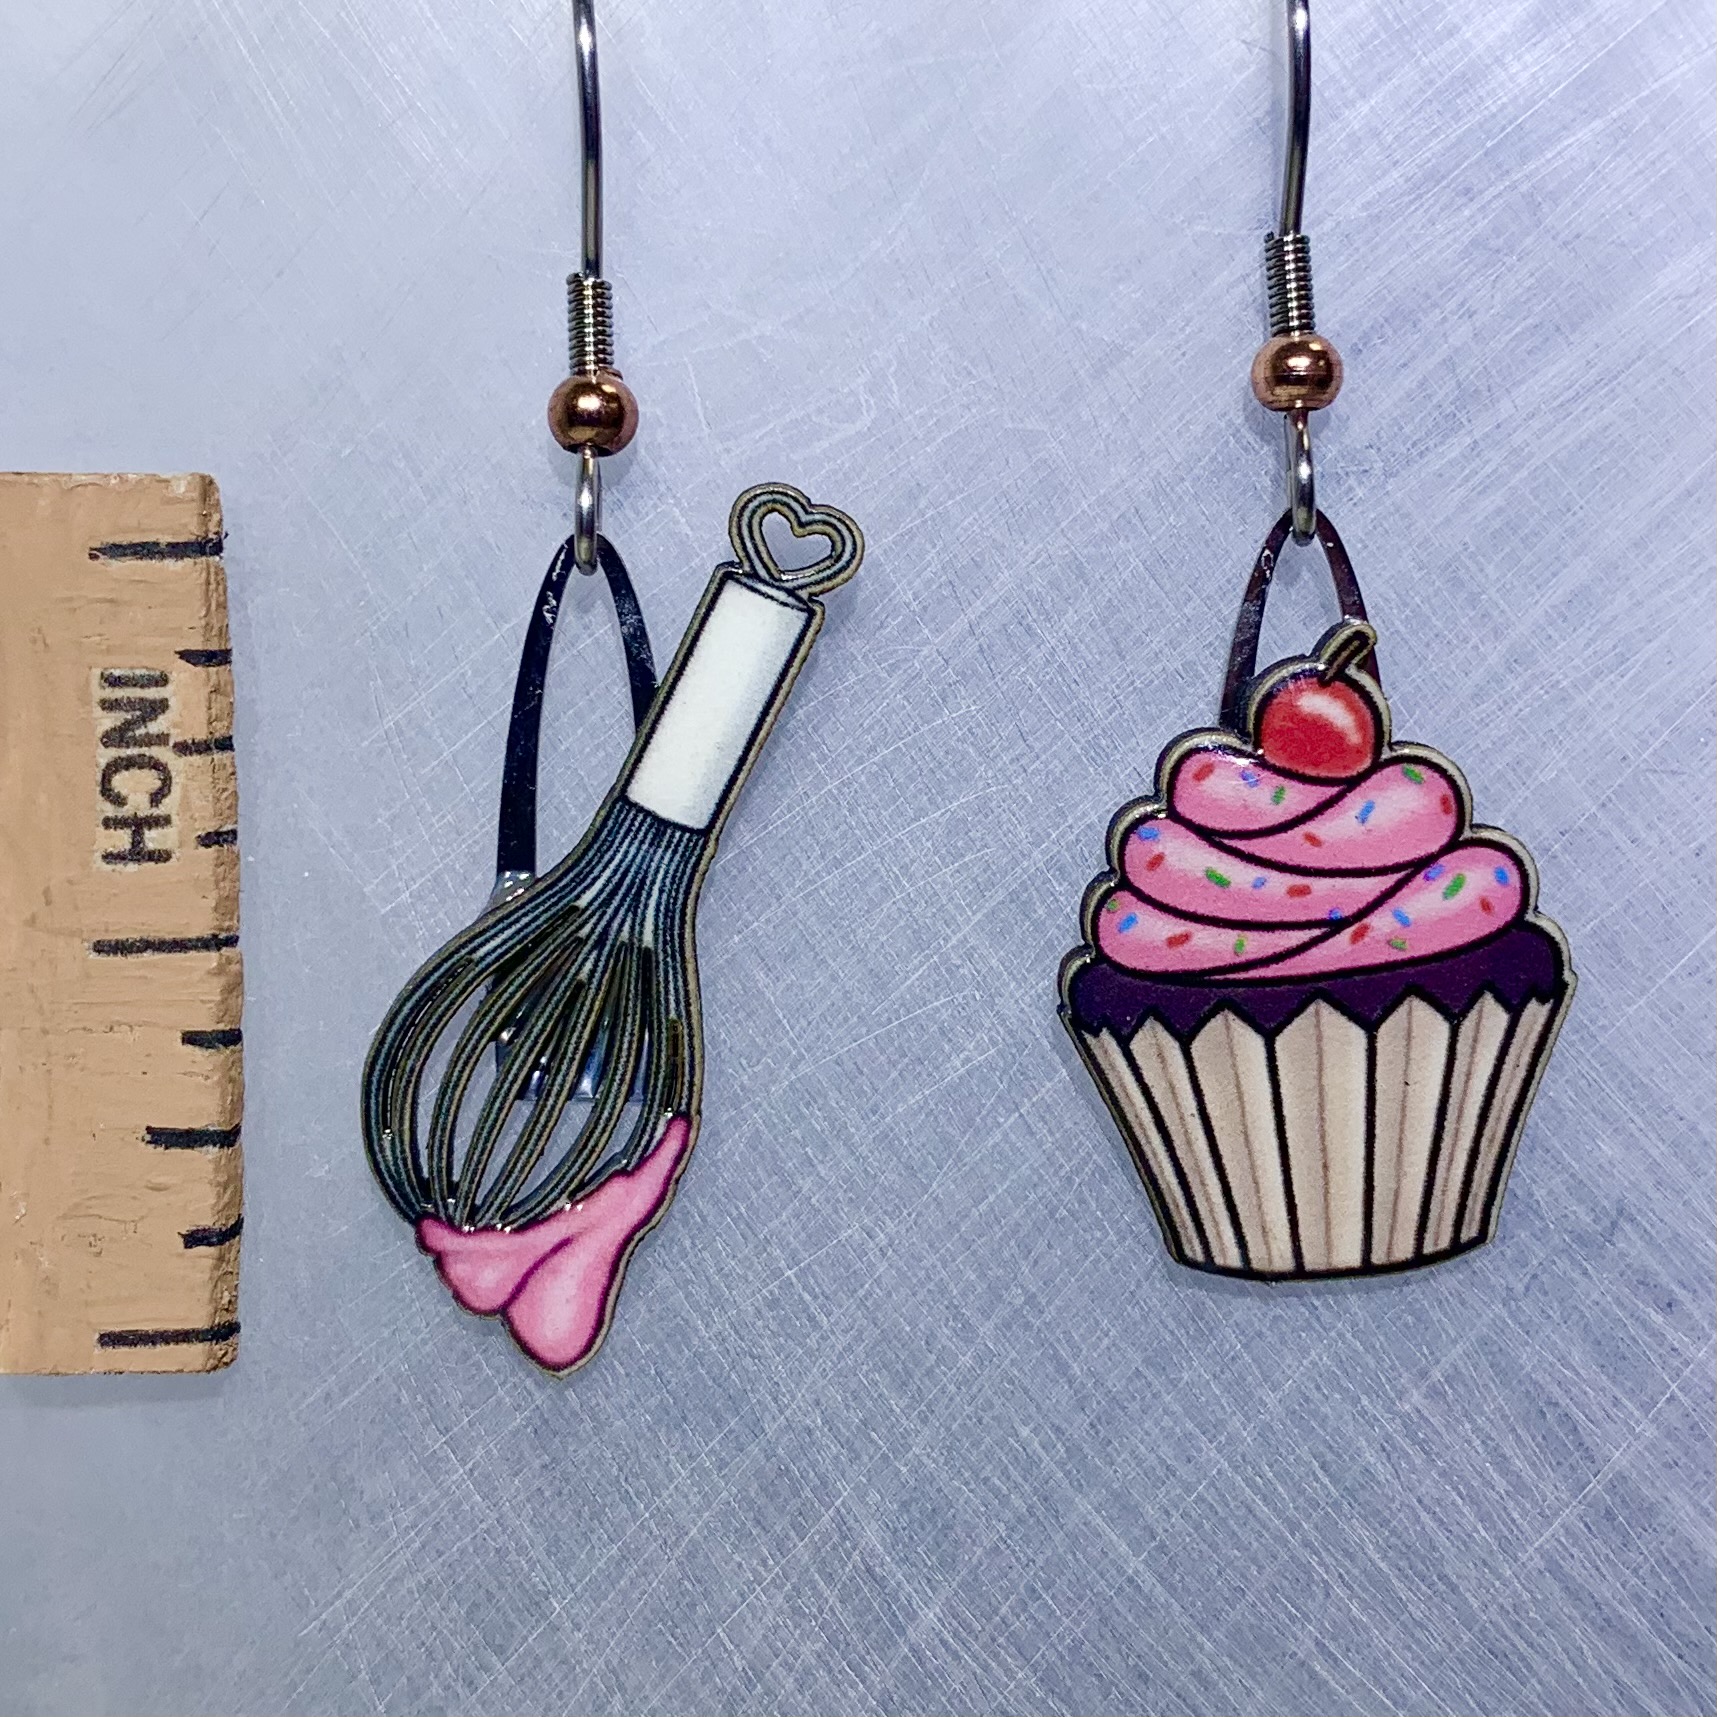 Picture shown is of 1 inch tall pair of earrings of Baking Cupcakes.